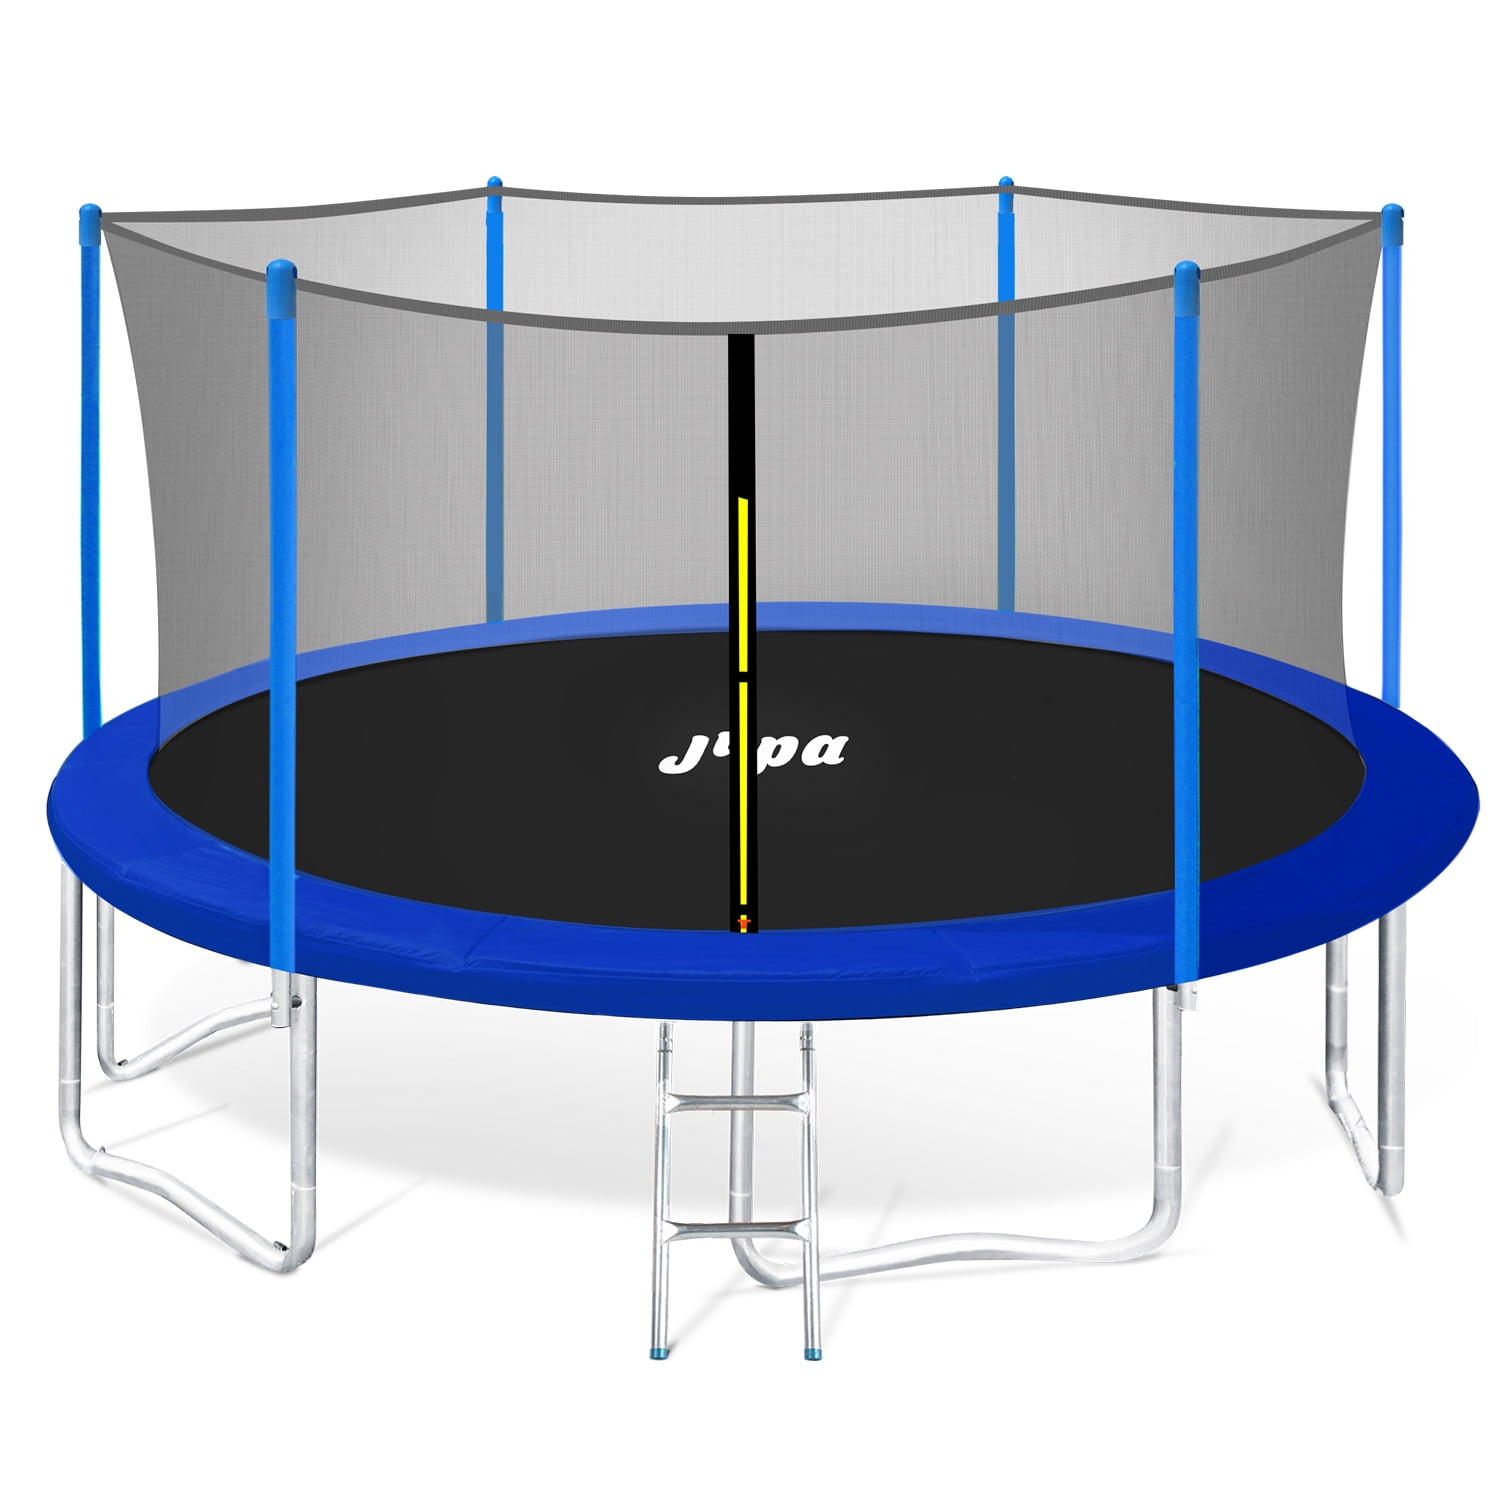 JUPA 425LBS Weight Capacity Kids Trampoline,15FT 14FT 12FT 10FT 8FT Outdoor Trampoline with Safety Enclosure Net All Accessories for Kids and Adults,Complies with ASTM Standards 